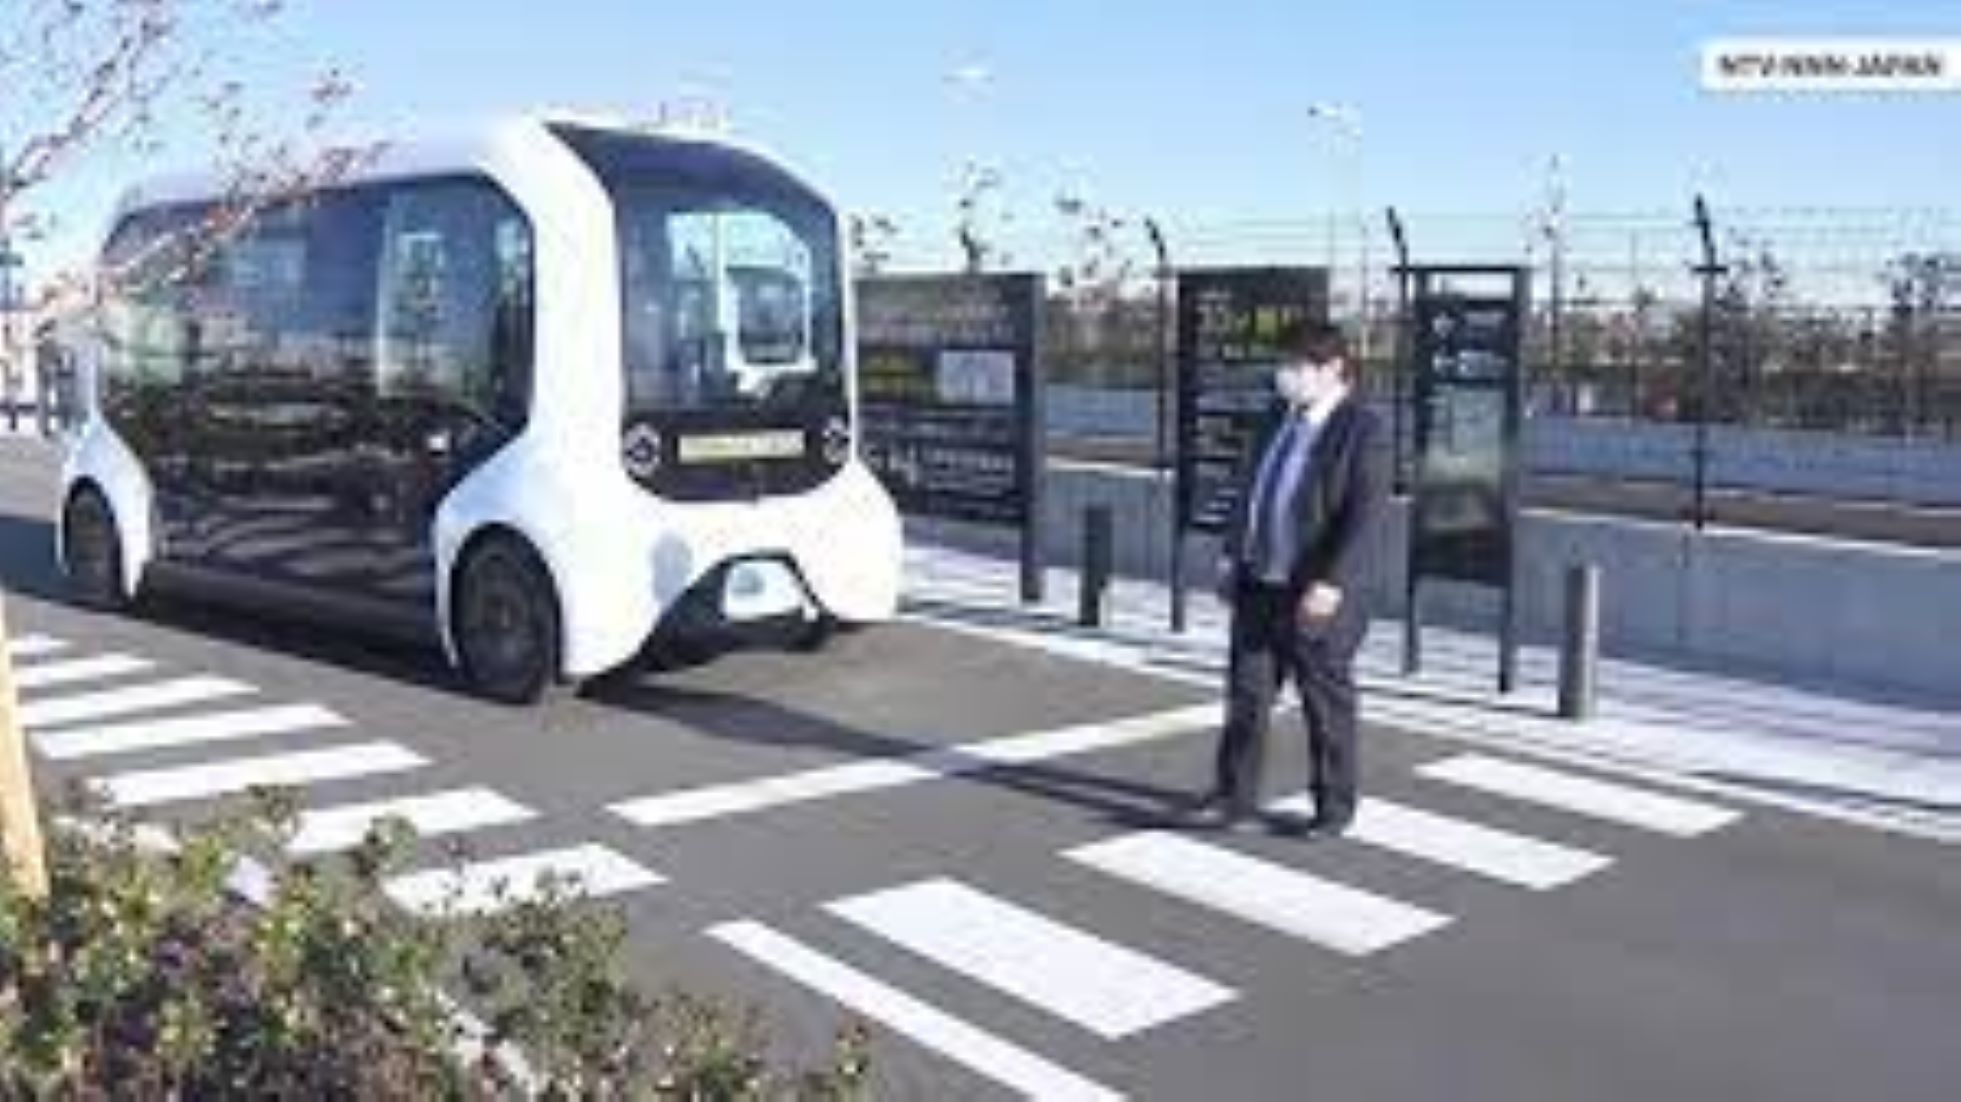 Japan Started Self-Driving Bus Test Runs In Tokyo